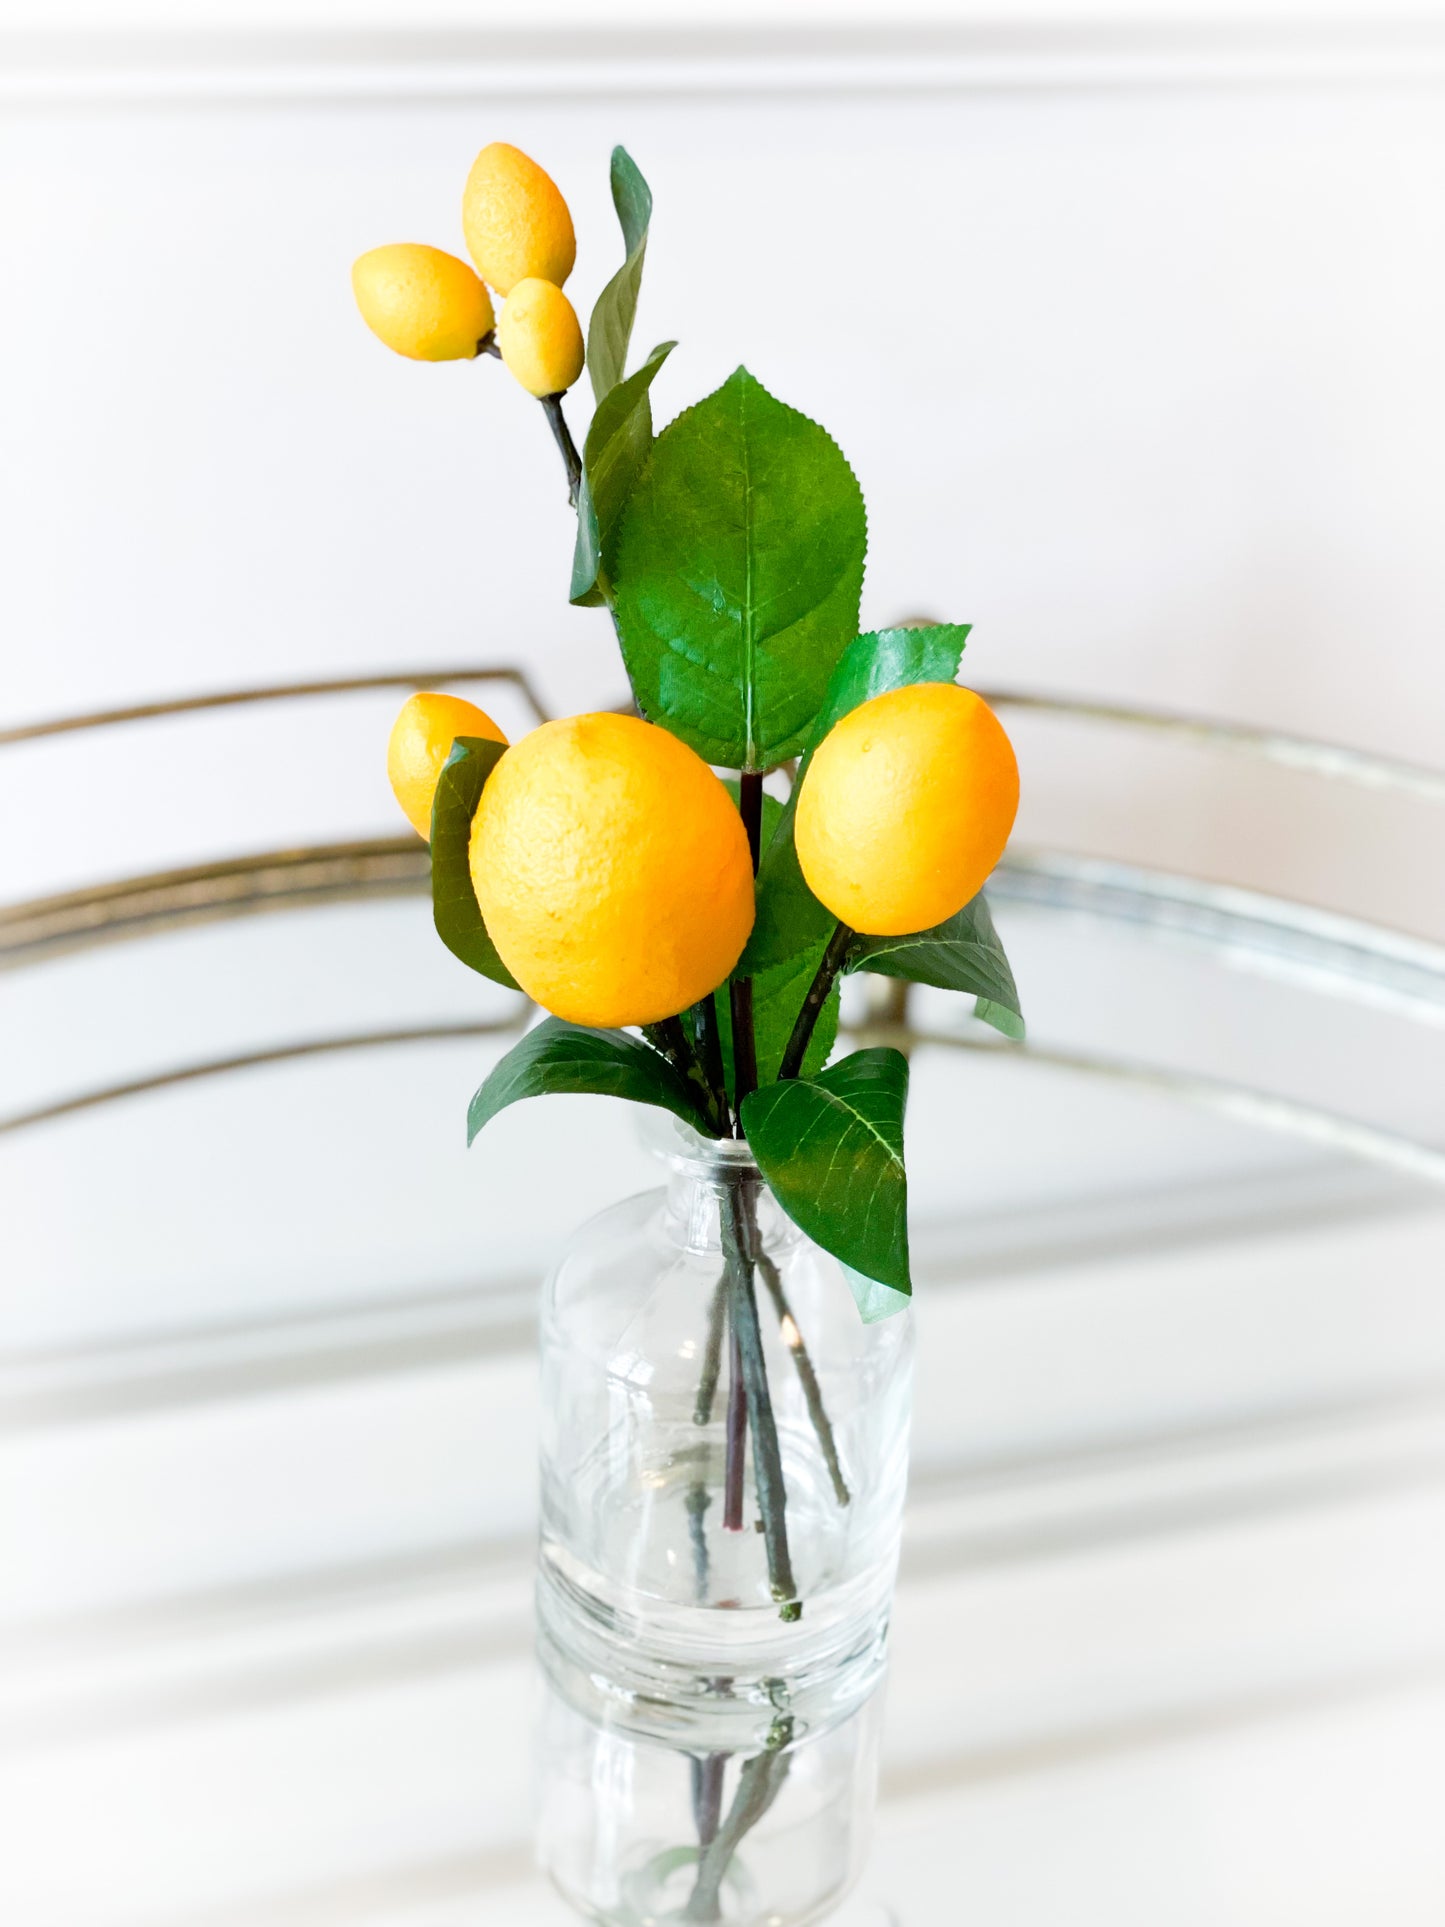 Lemon Branch In A Glass Vase With Acrylic Water